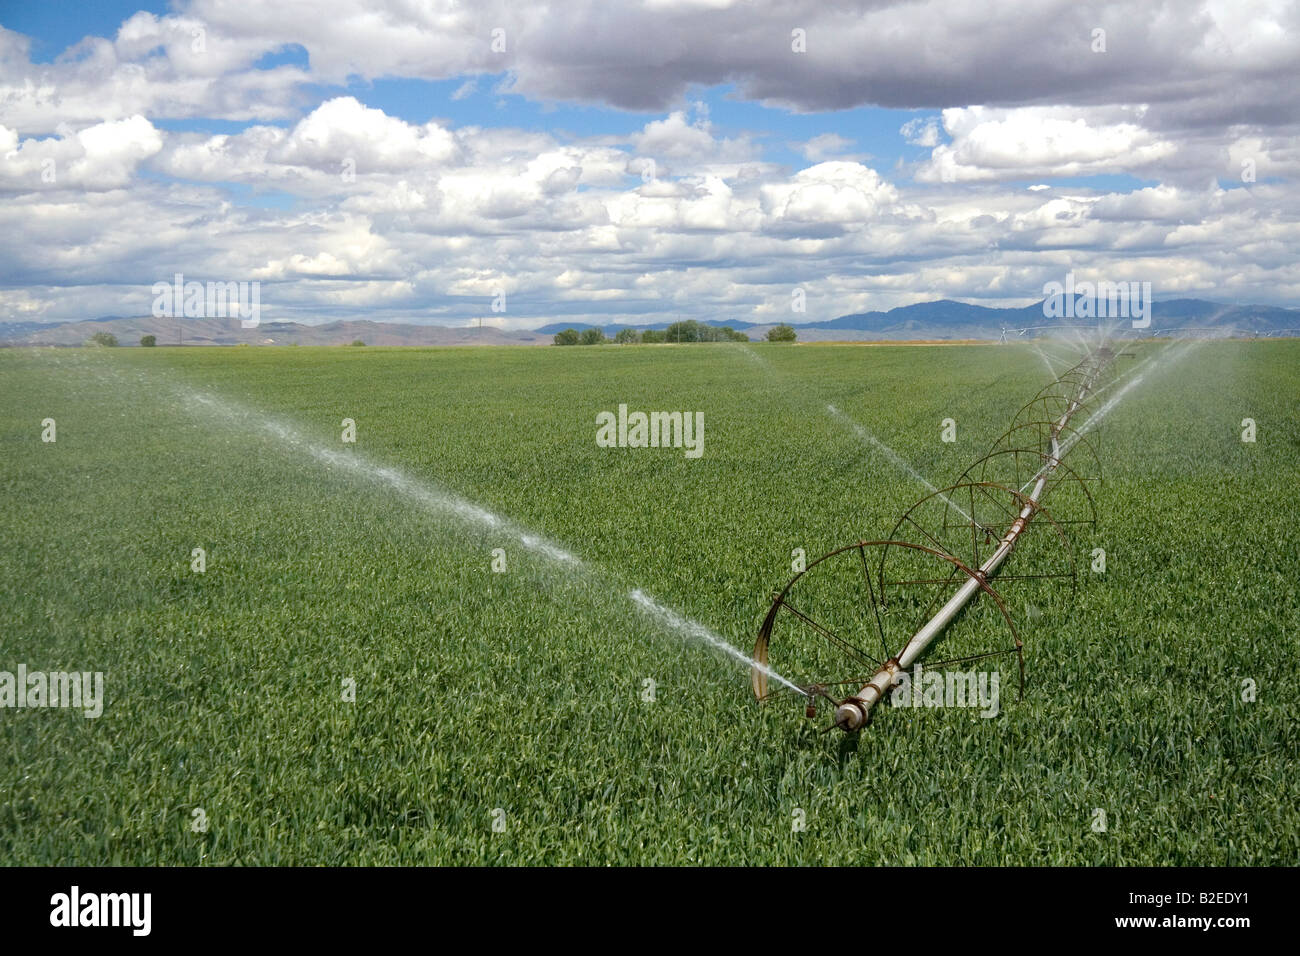 Sprinkler irrigation in a wheat field in Canyon County Idaho Stock Photo